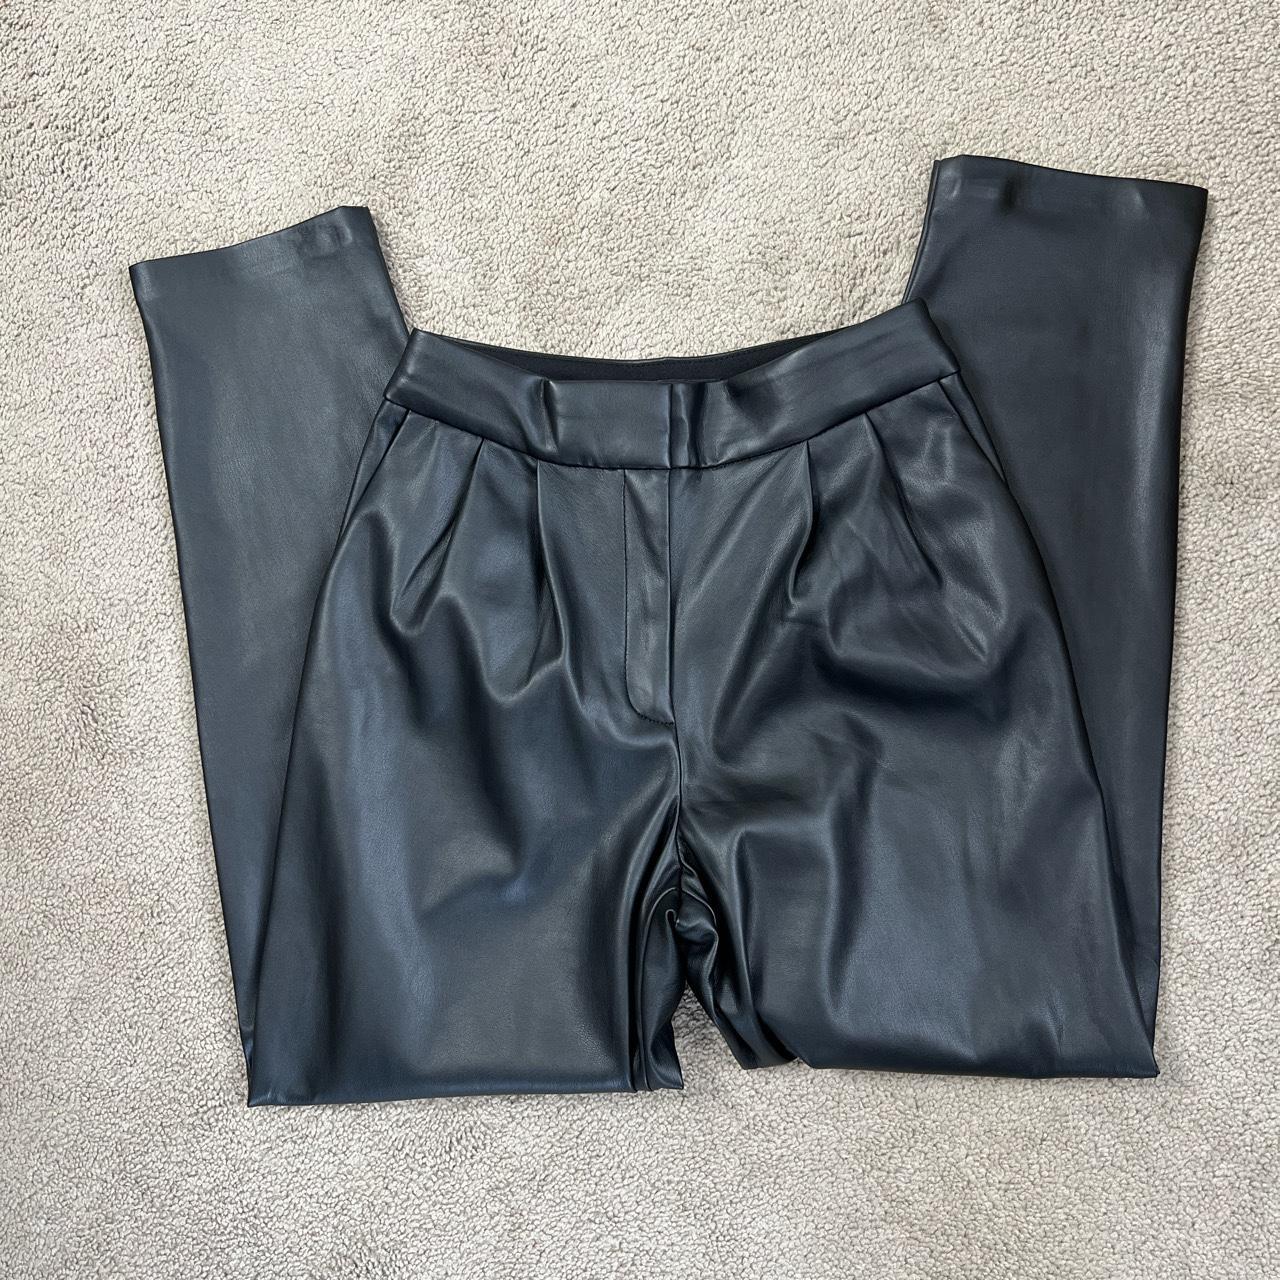 Express Faux Leather Pants